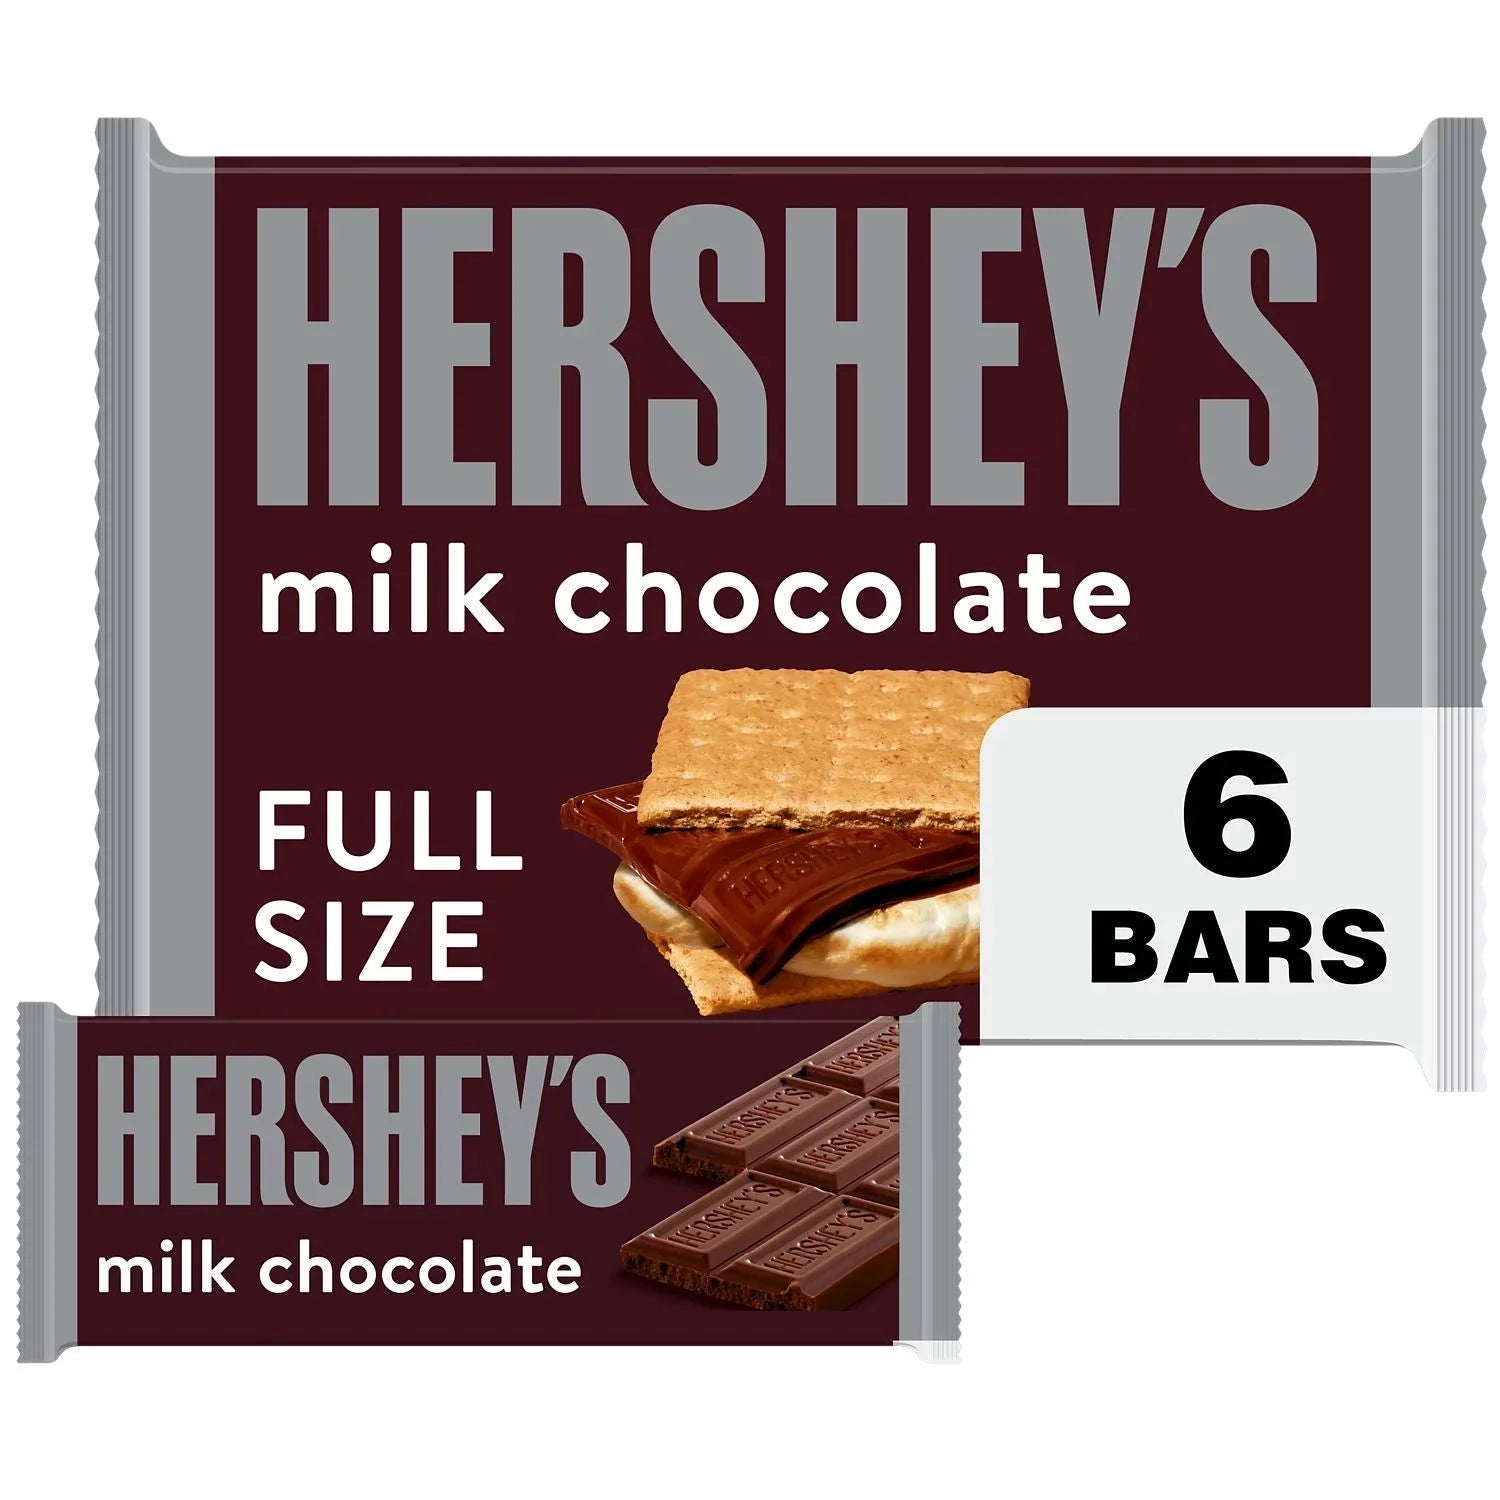 Wholesale prices with free shipping all over United States Hershey's Milk Chocolate Full Size Candy, Bars 1.55 oz, 6 Count - Steven Deals